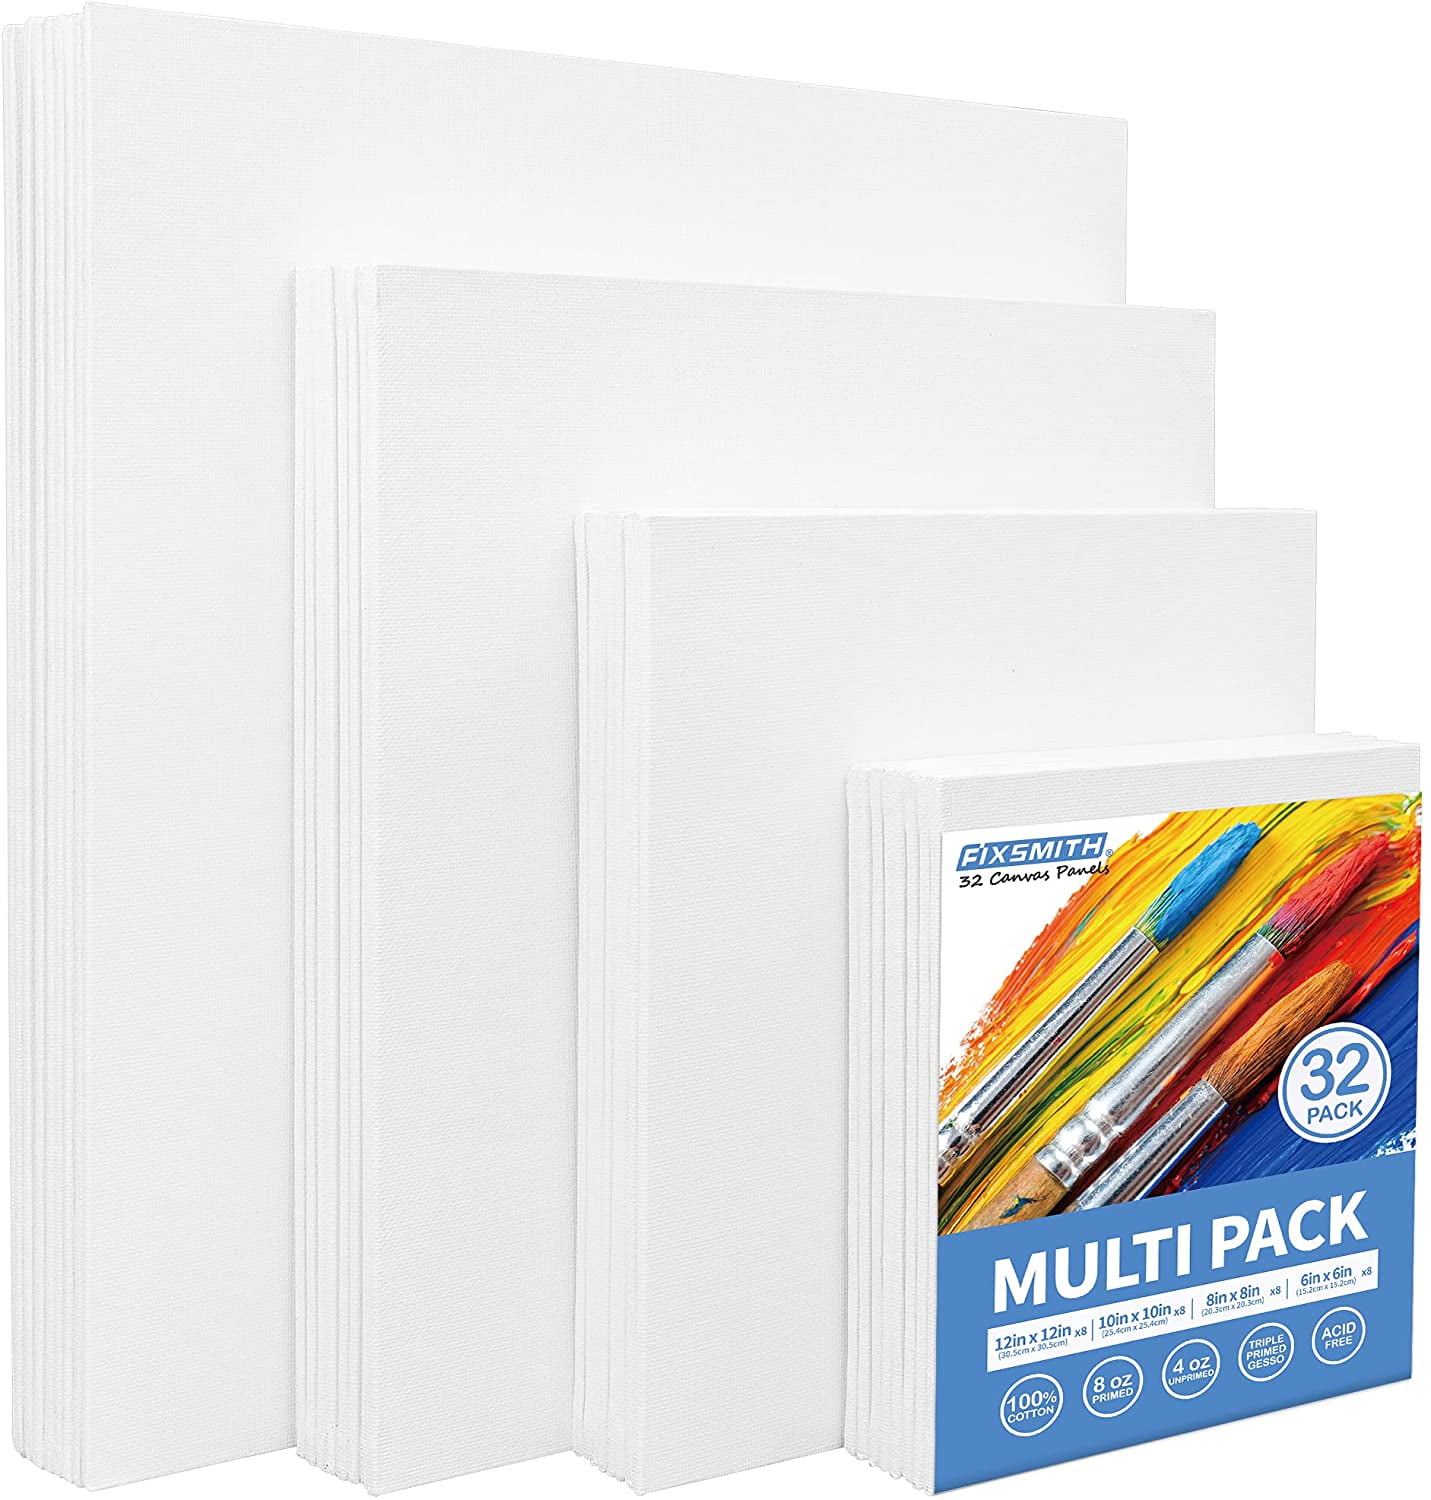 PHOENIX Watercolor Canvases for Painting - 12 Pack Panels Multipack,  5x7,8x10,9x12,11x14 Inch - 8 Oz Primed Cotton Acid Free Canvas Boards for